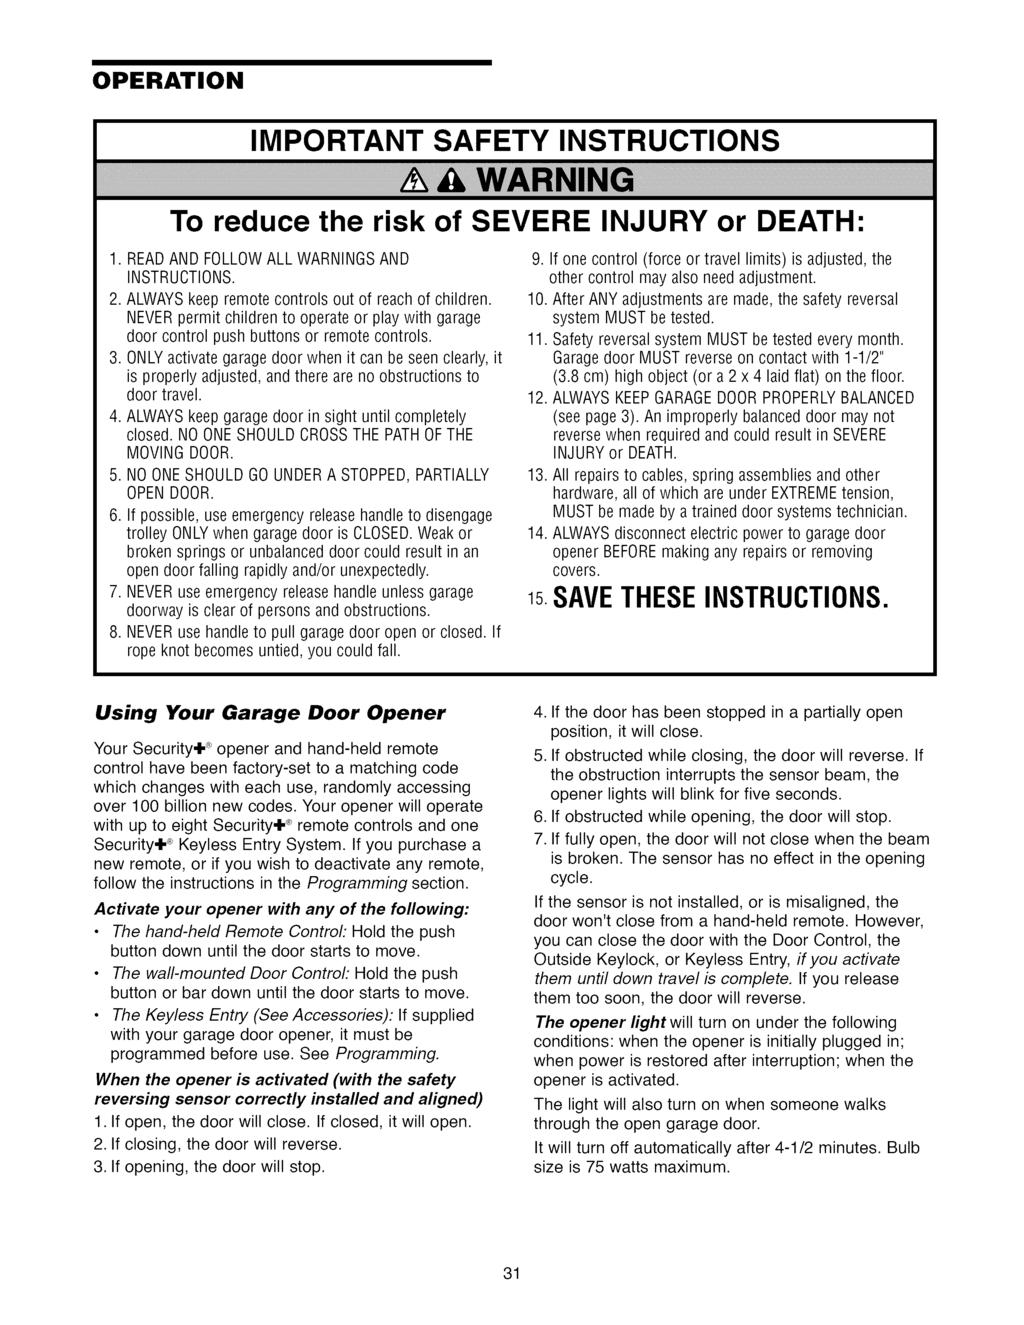 OPERATION IMPORTANT SAFETY INSTRUCTIONS To reduce the risk of SEVERE INJURY or DEATH: 1. READAND FOLLOWALL WARNINGSAND INSTRUCTIONS. 2. ALWAYSkeep remote controls out of reach of children.